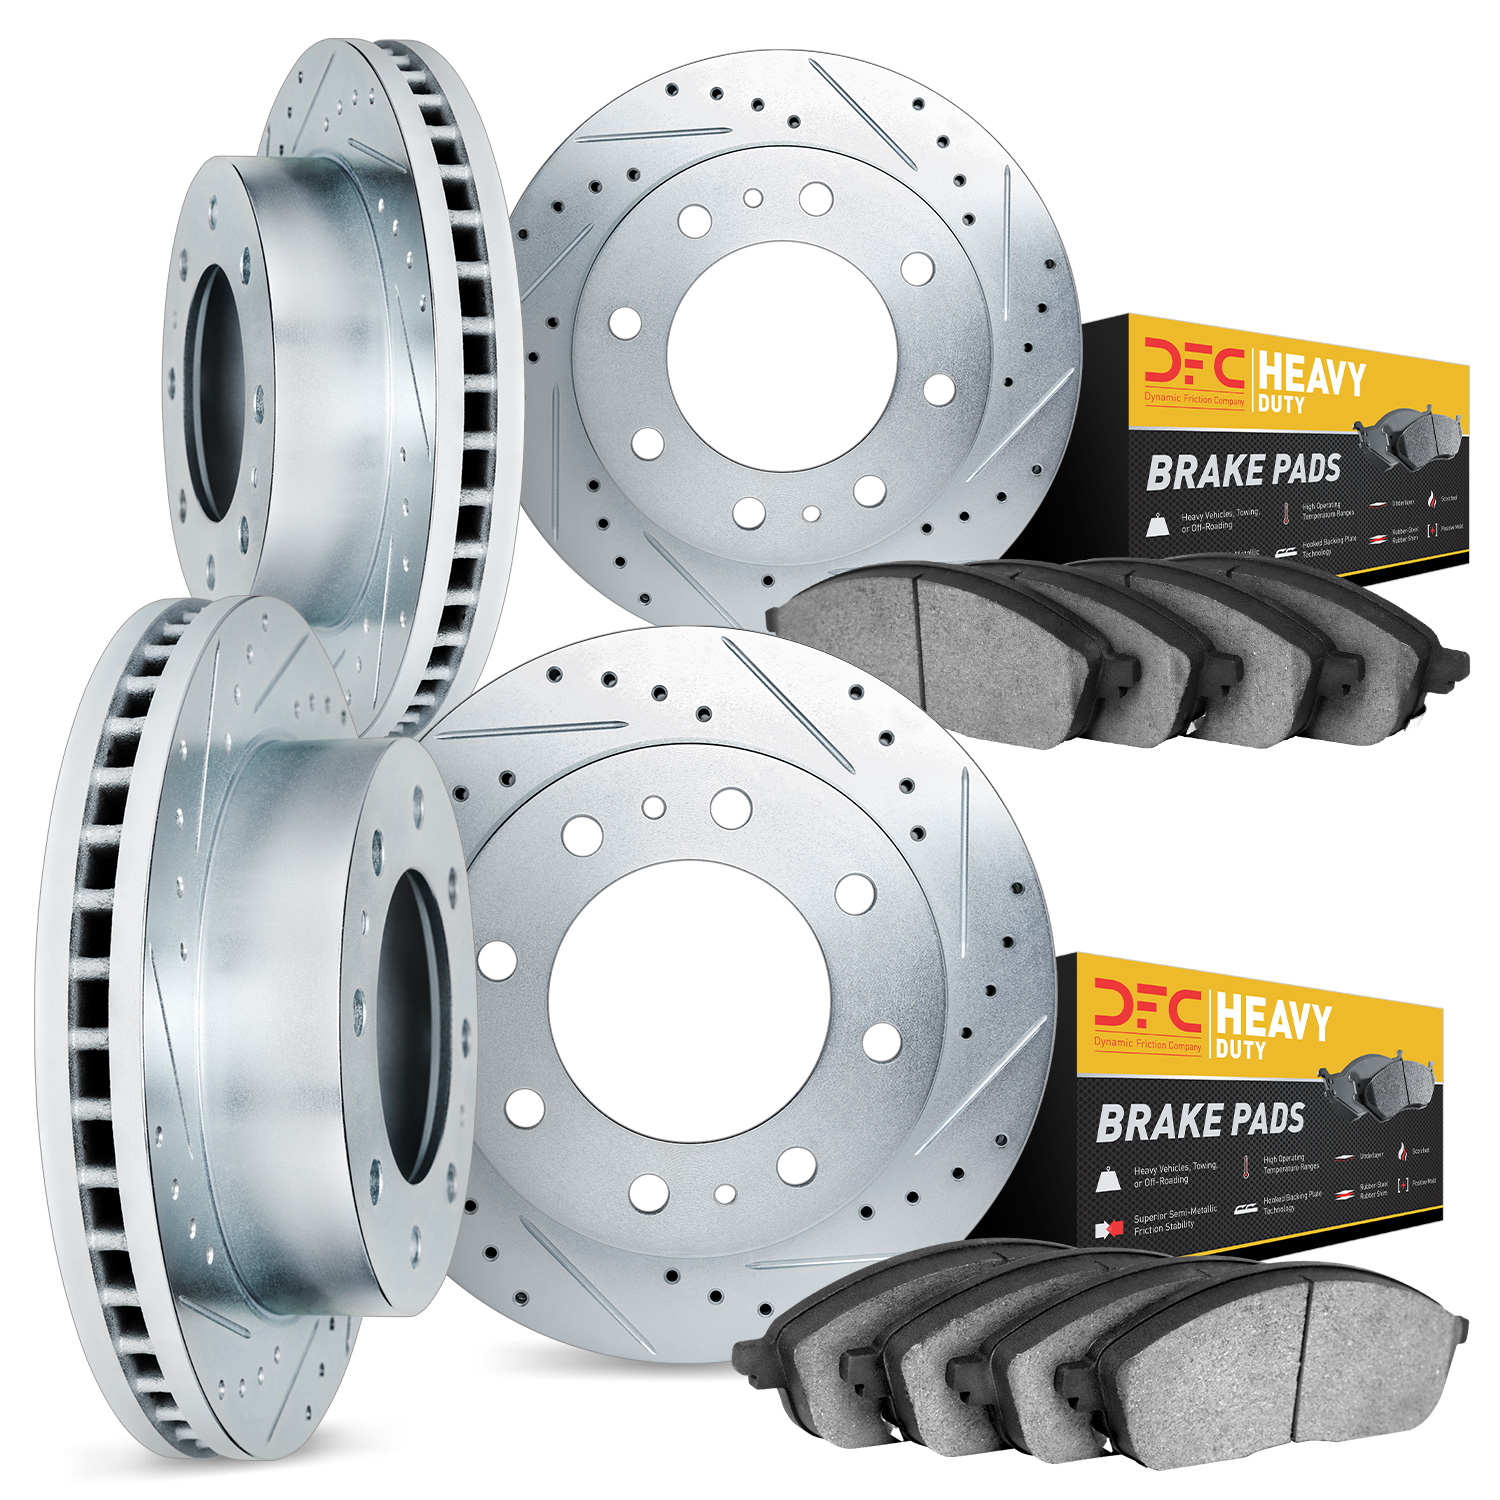 7204-48144 Drilled/Slotted Rotors w/Heavy-Duty Brake Pads Kit [Silver], 2005-2020 GM, Position: Front and Rear